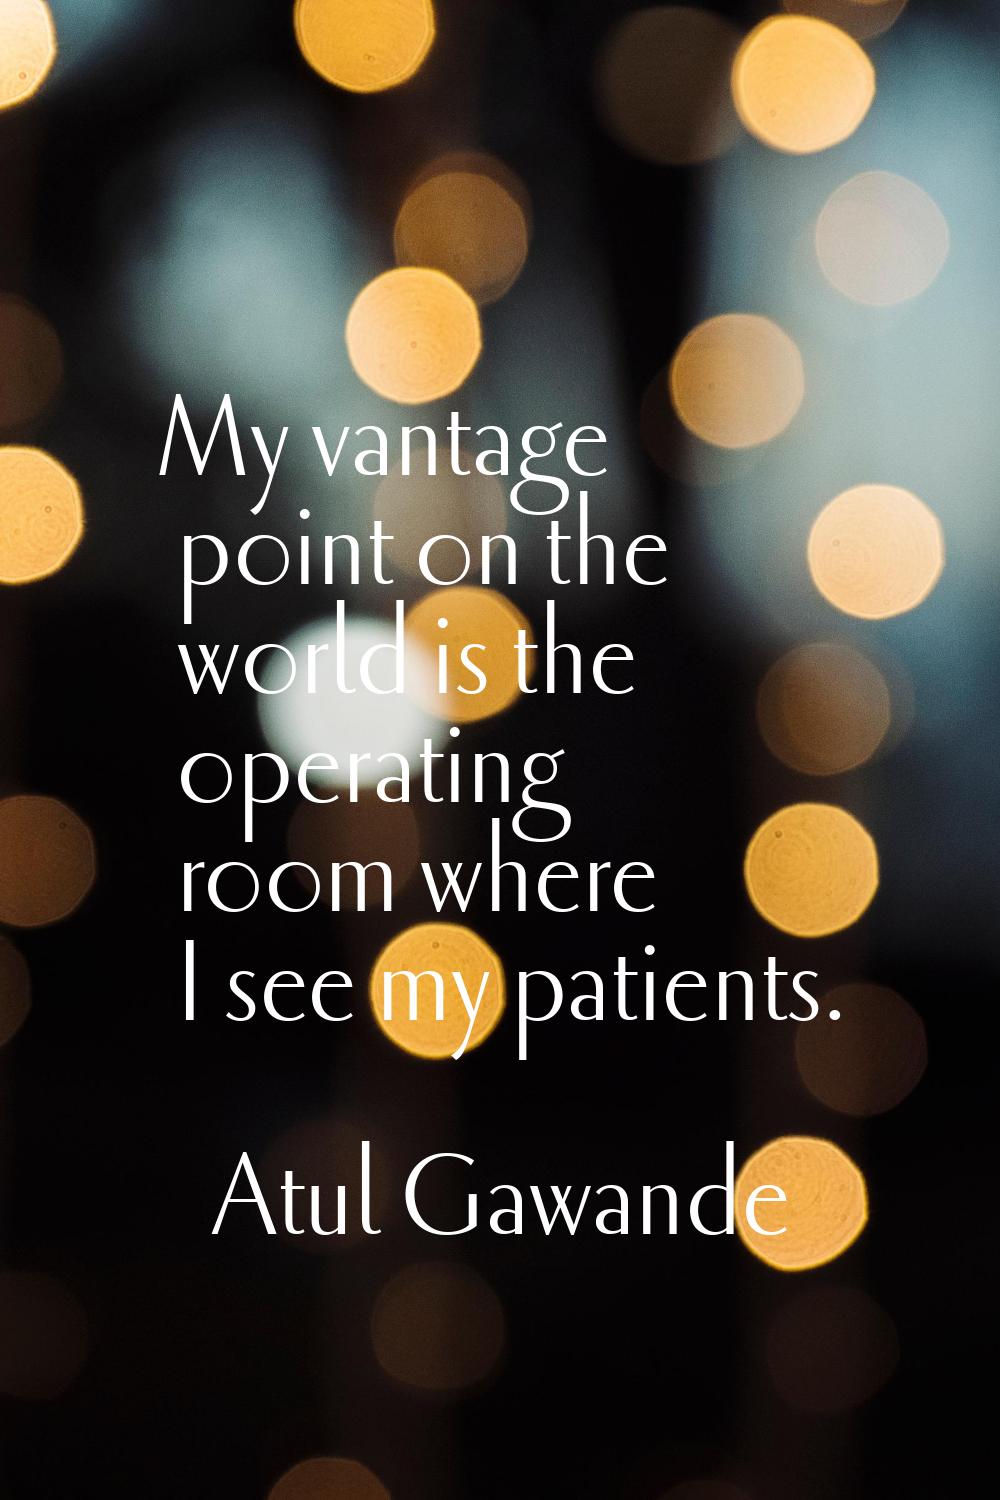 My vantage point on the world is the operating room where I see my patients.